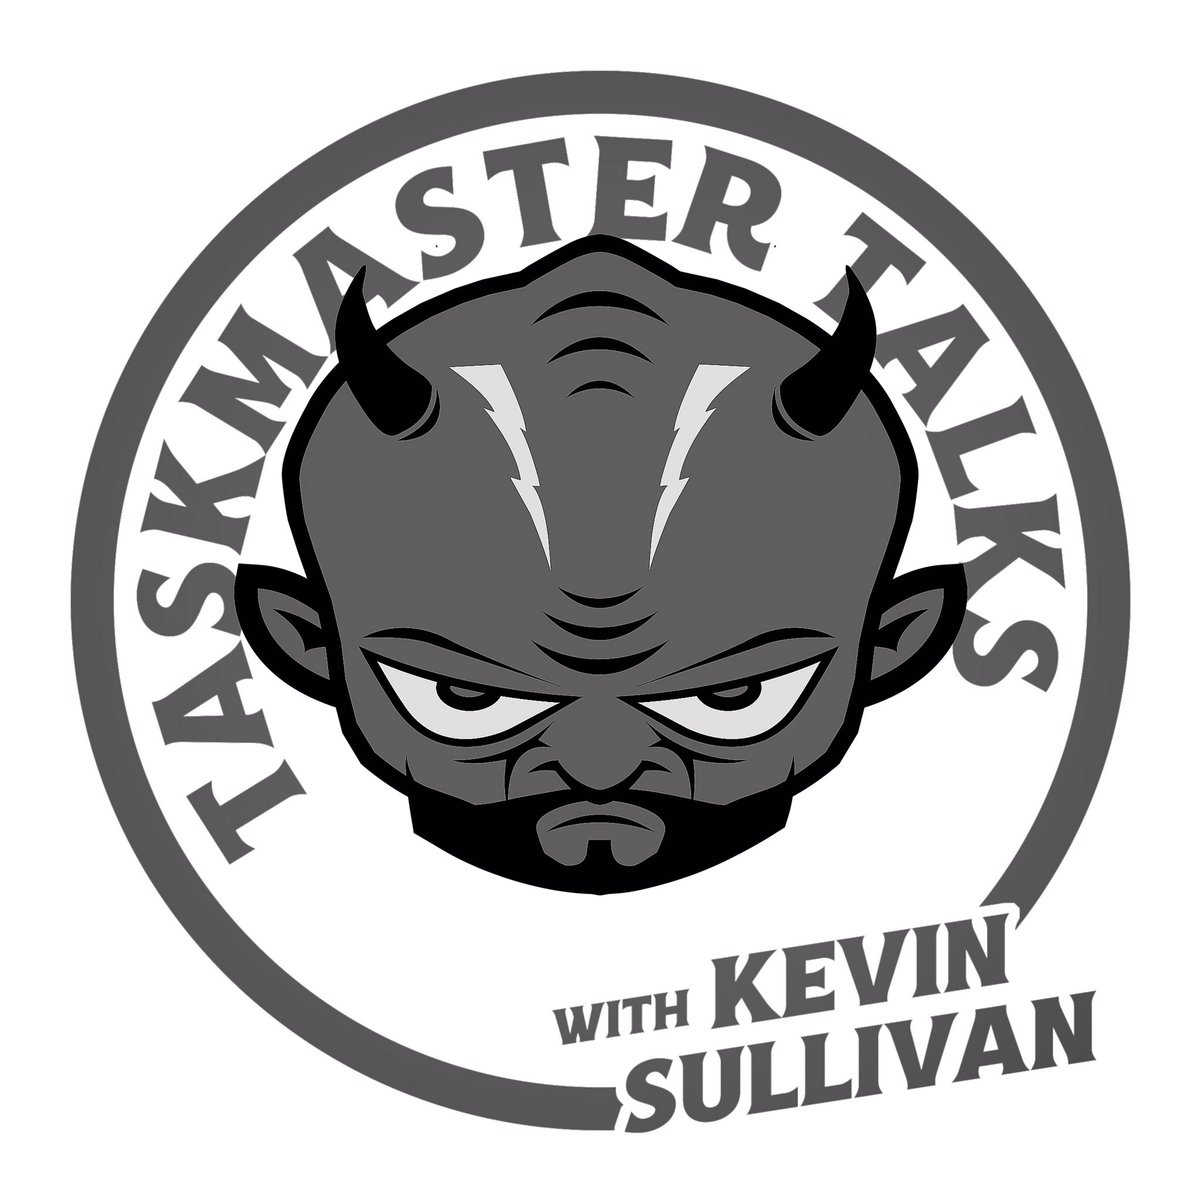 The latest episode of #TaskmasterTalks w/ #KevinSullivan & #JohnPoz is about #PaulHeyman and #WWE run. Kevin will talk about #CMPunk #brocklesnar #bloodline and so much more! @jffeeney3rd @theccnetwork1 @historyofwrest

spreaker.com/episode/episod…